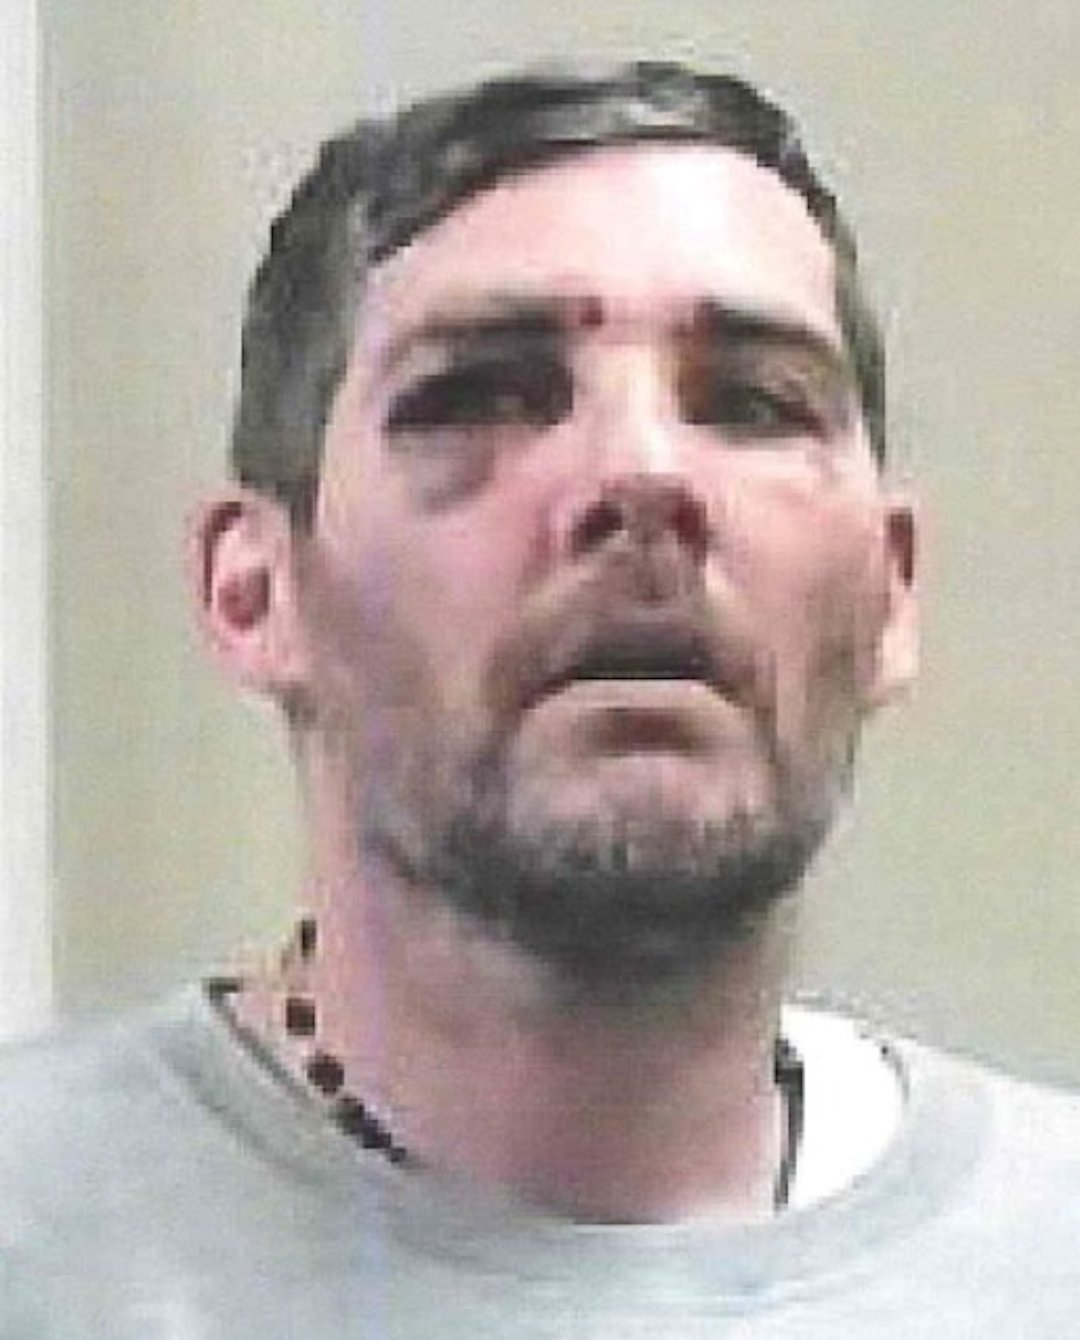 Sussex Police are hunting for burglar Anthony Kingwell who fled Ford prison